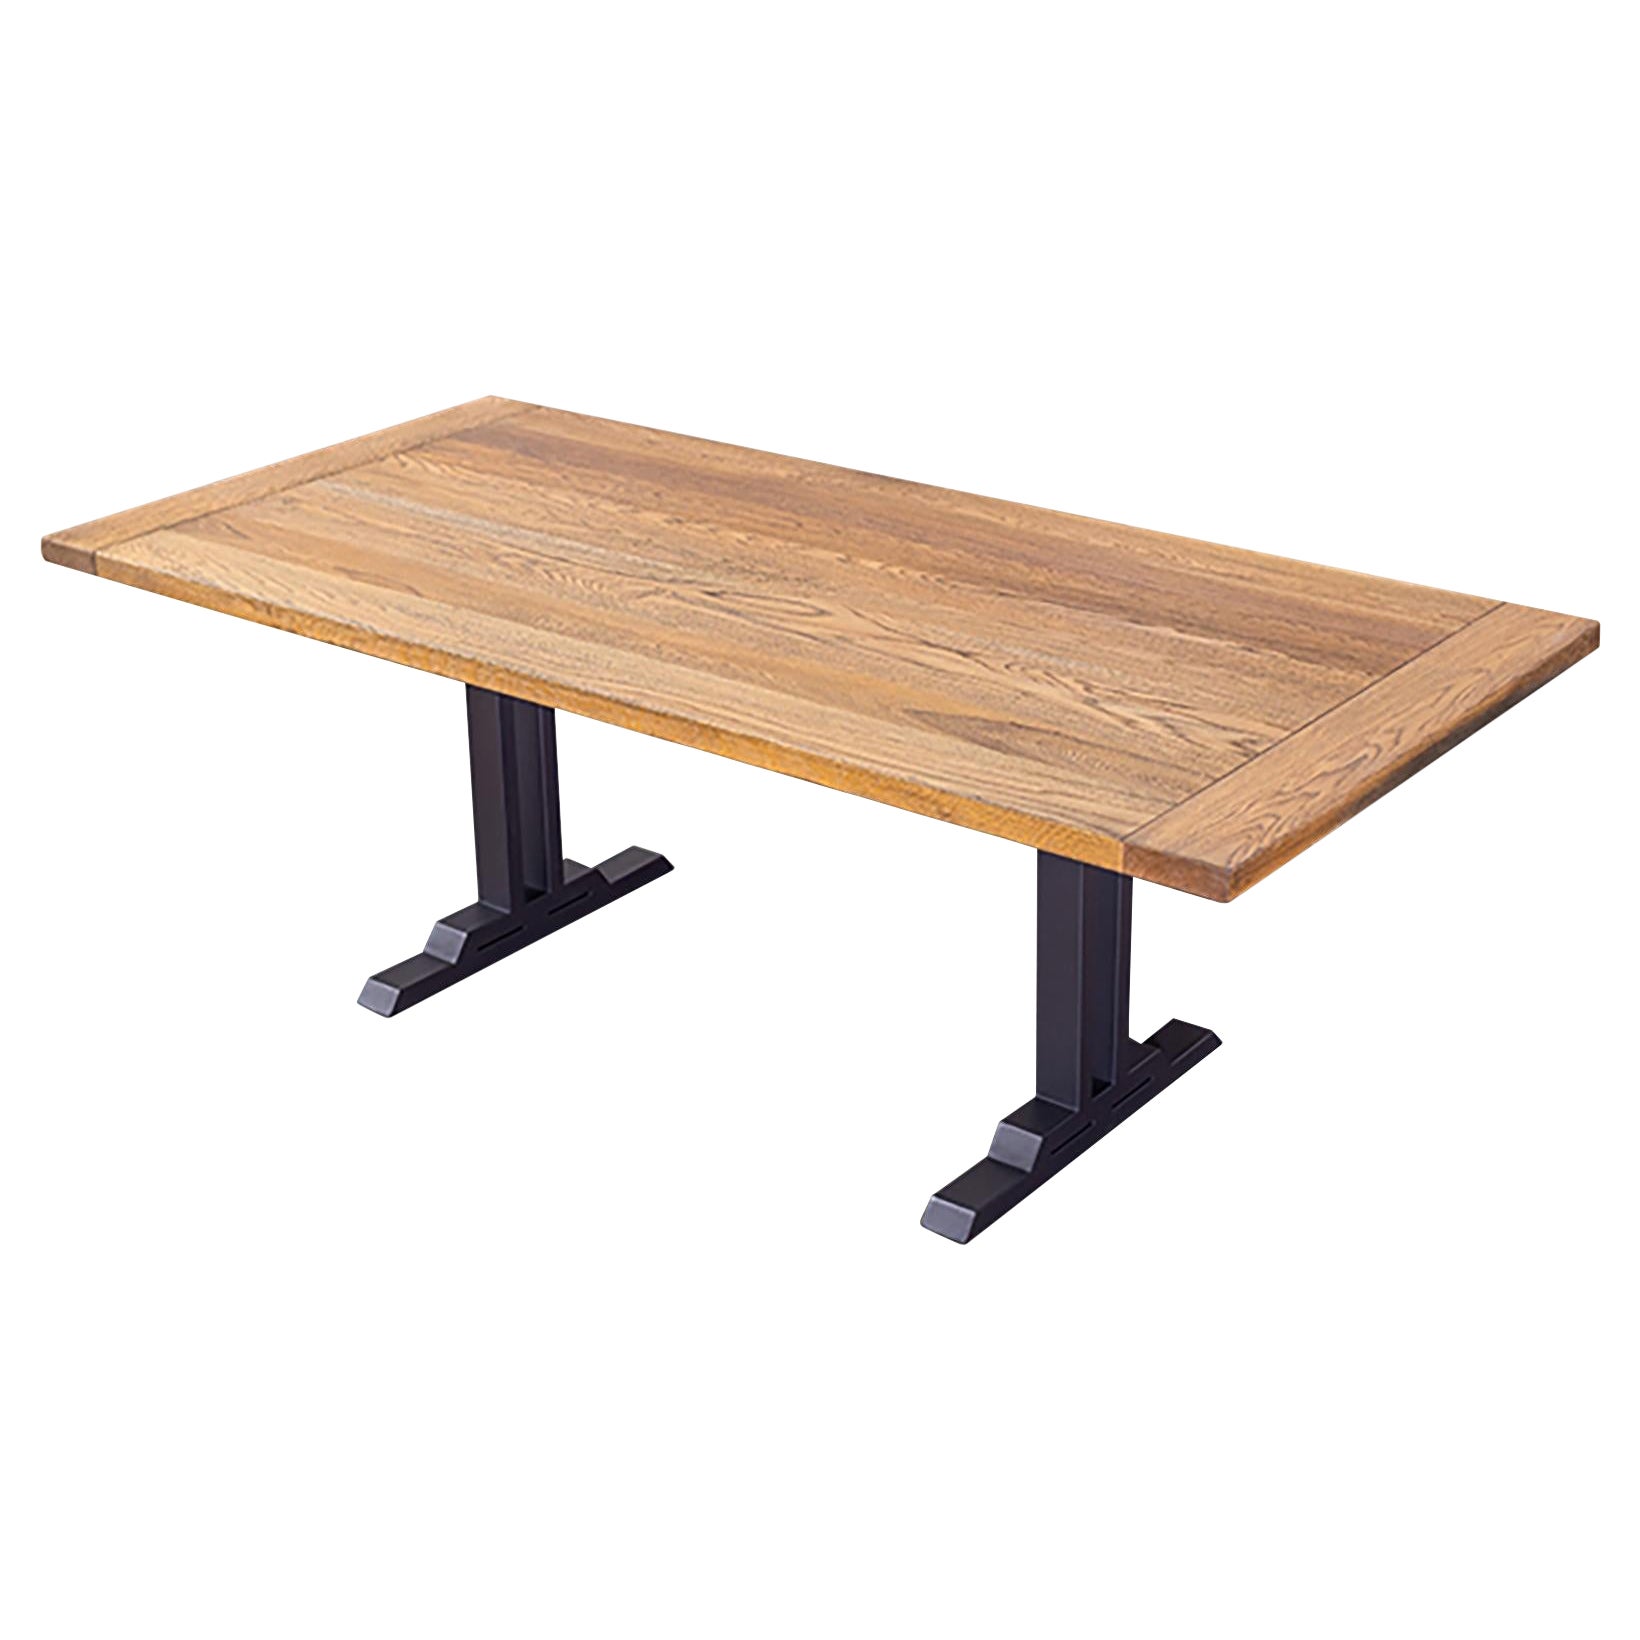 Solid Teak or Oak Dining Tables, Choose Your Top Then Choose Your Bottom For Sale